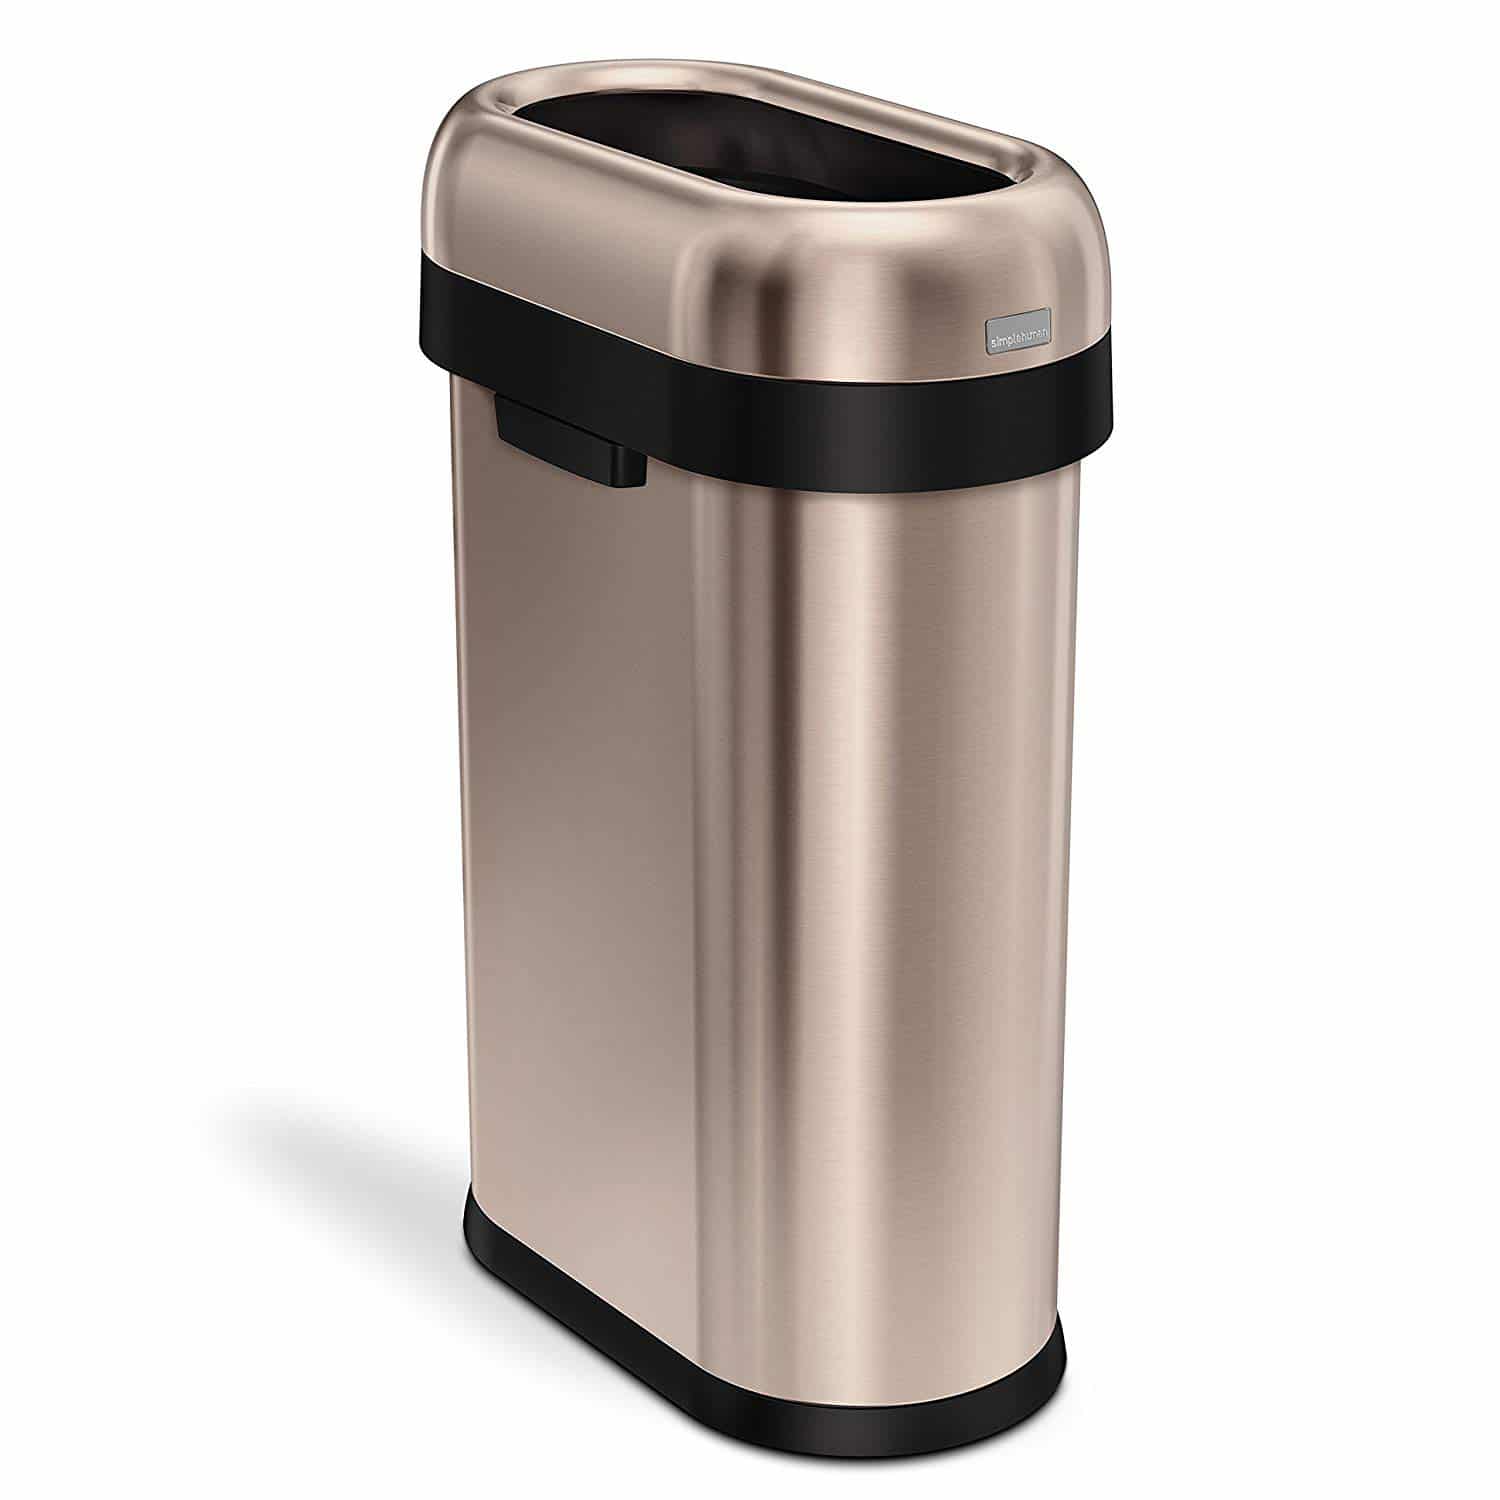 Top 10 Best Automatic Trash Cans in 2022 Reviews